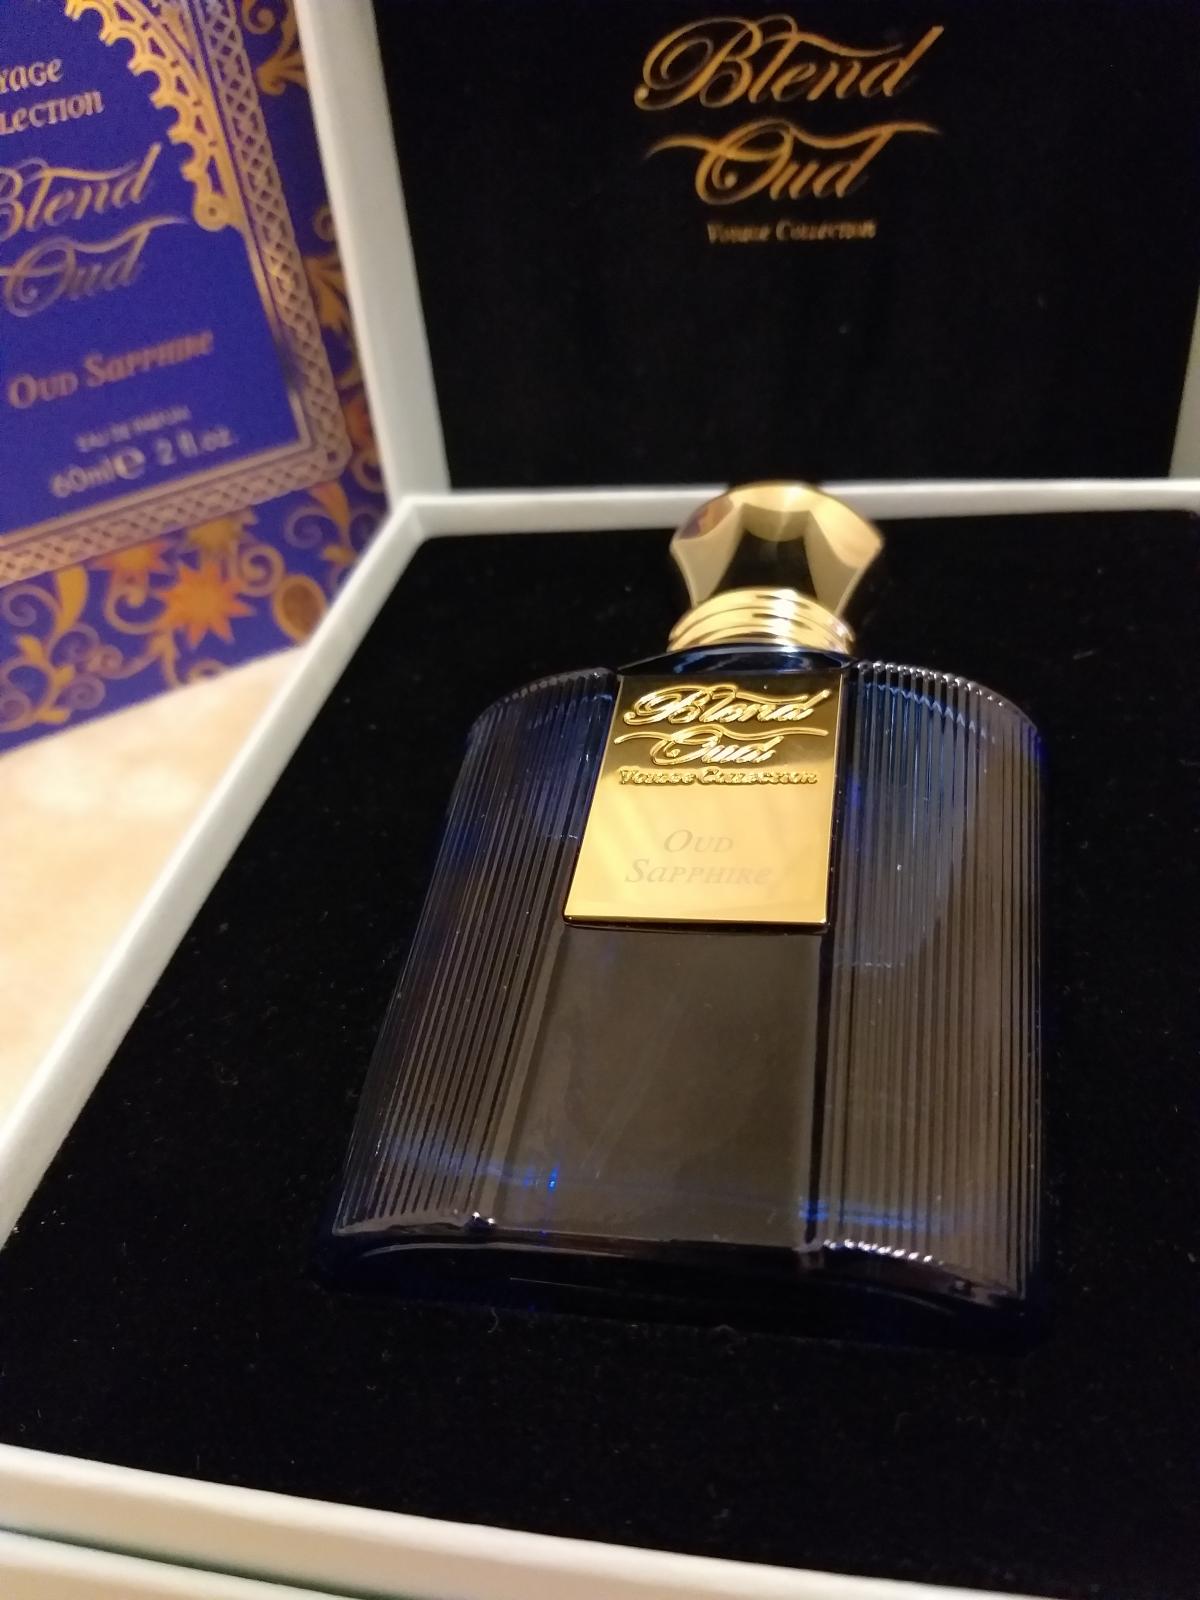 Oud Sapphire Blend Oud perfume - a fragrance for women and men 2018